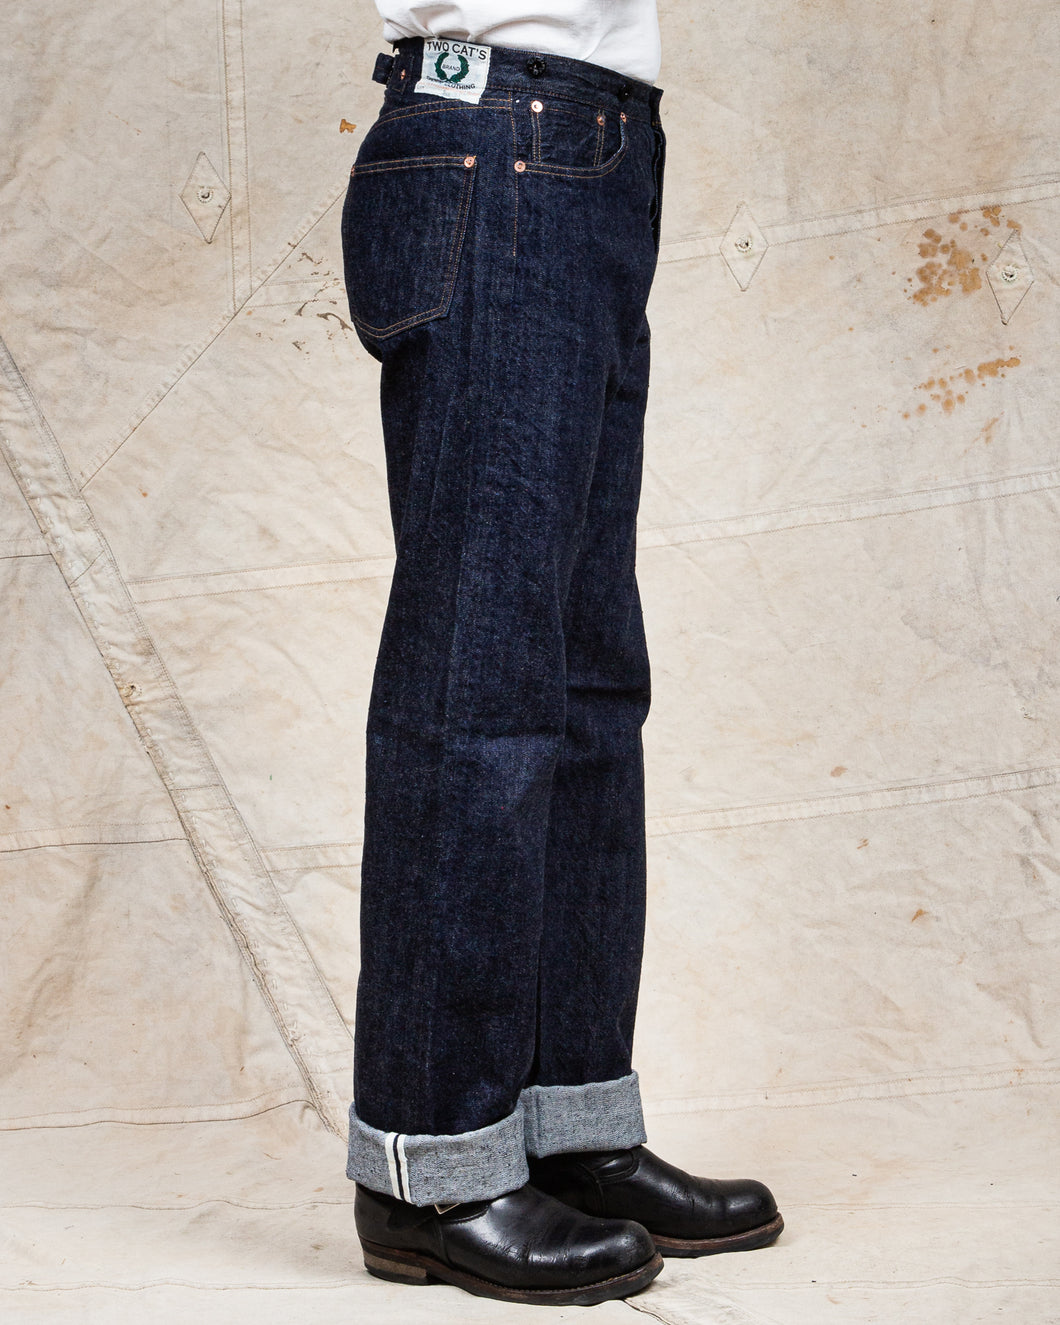 TCB Jeans Viktor's Voice Two Cat's Waist Overall Natural Indigo 